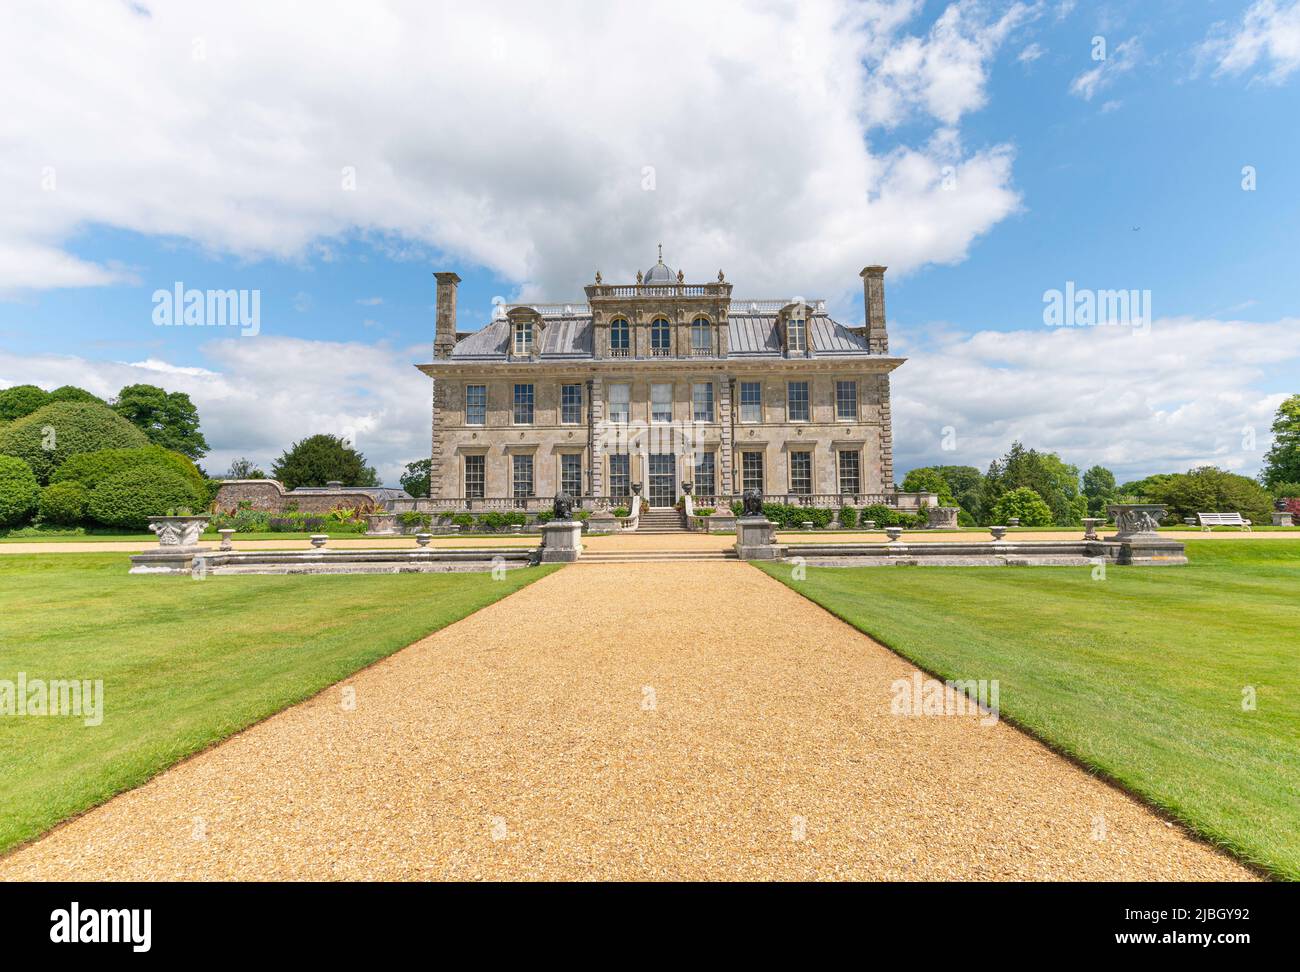 Kingston Lacy Country House with short grass and gravel path on a sunny day with white clouds.  Wimborne, Dorset, England. Stock Photo